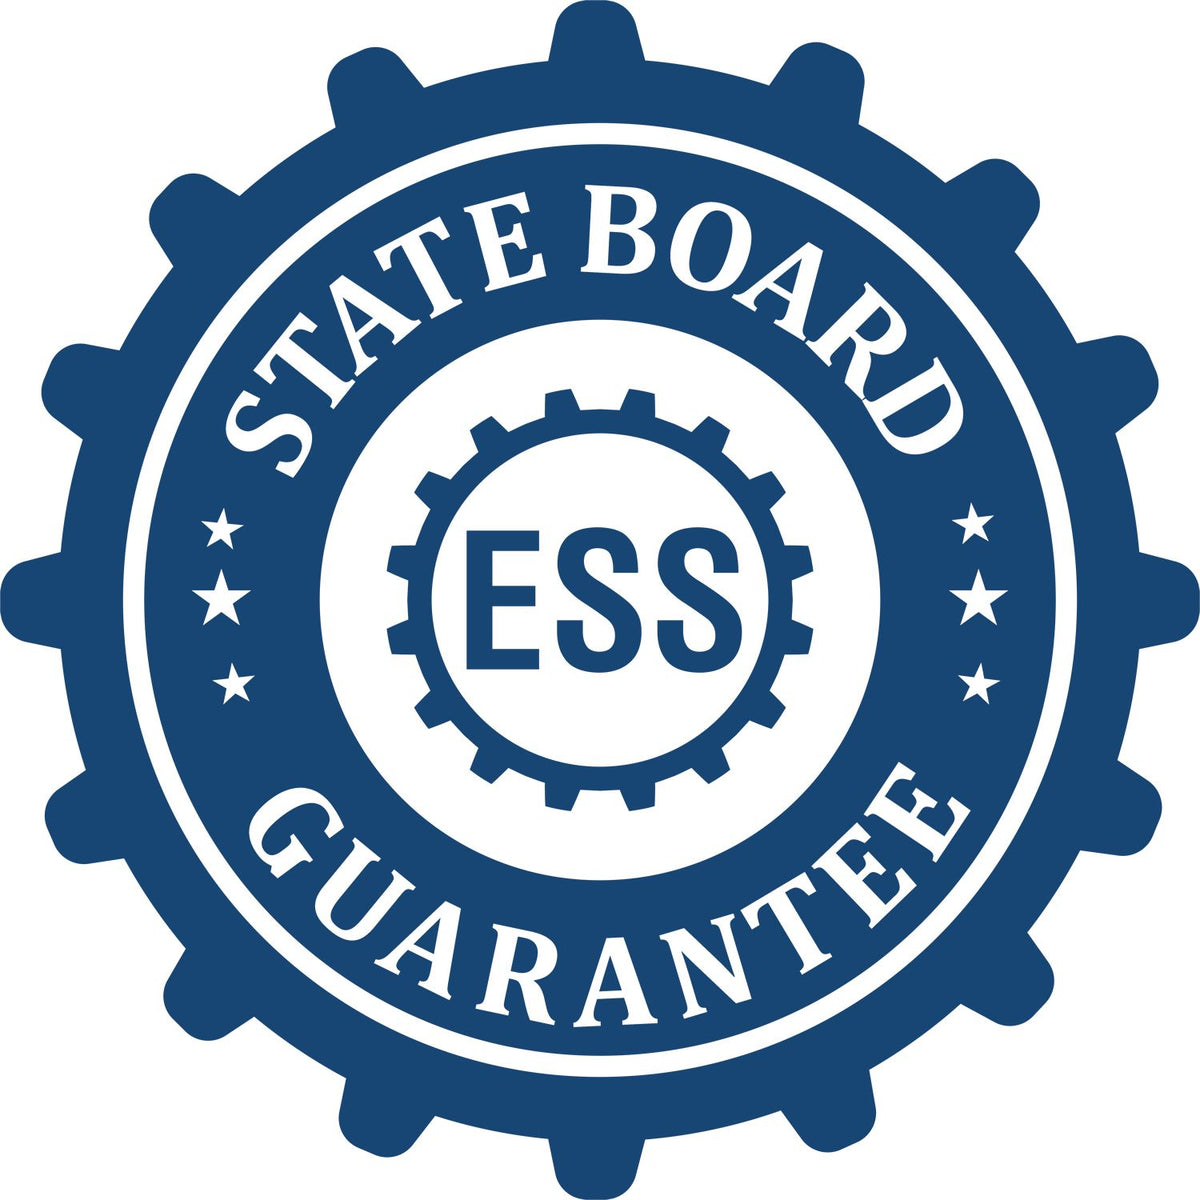 An emblem in a gear shape illustrating a state board guarantee for the Digital Missouri PE Stamp and Electronic Seal for Missouri Engineer product.